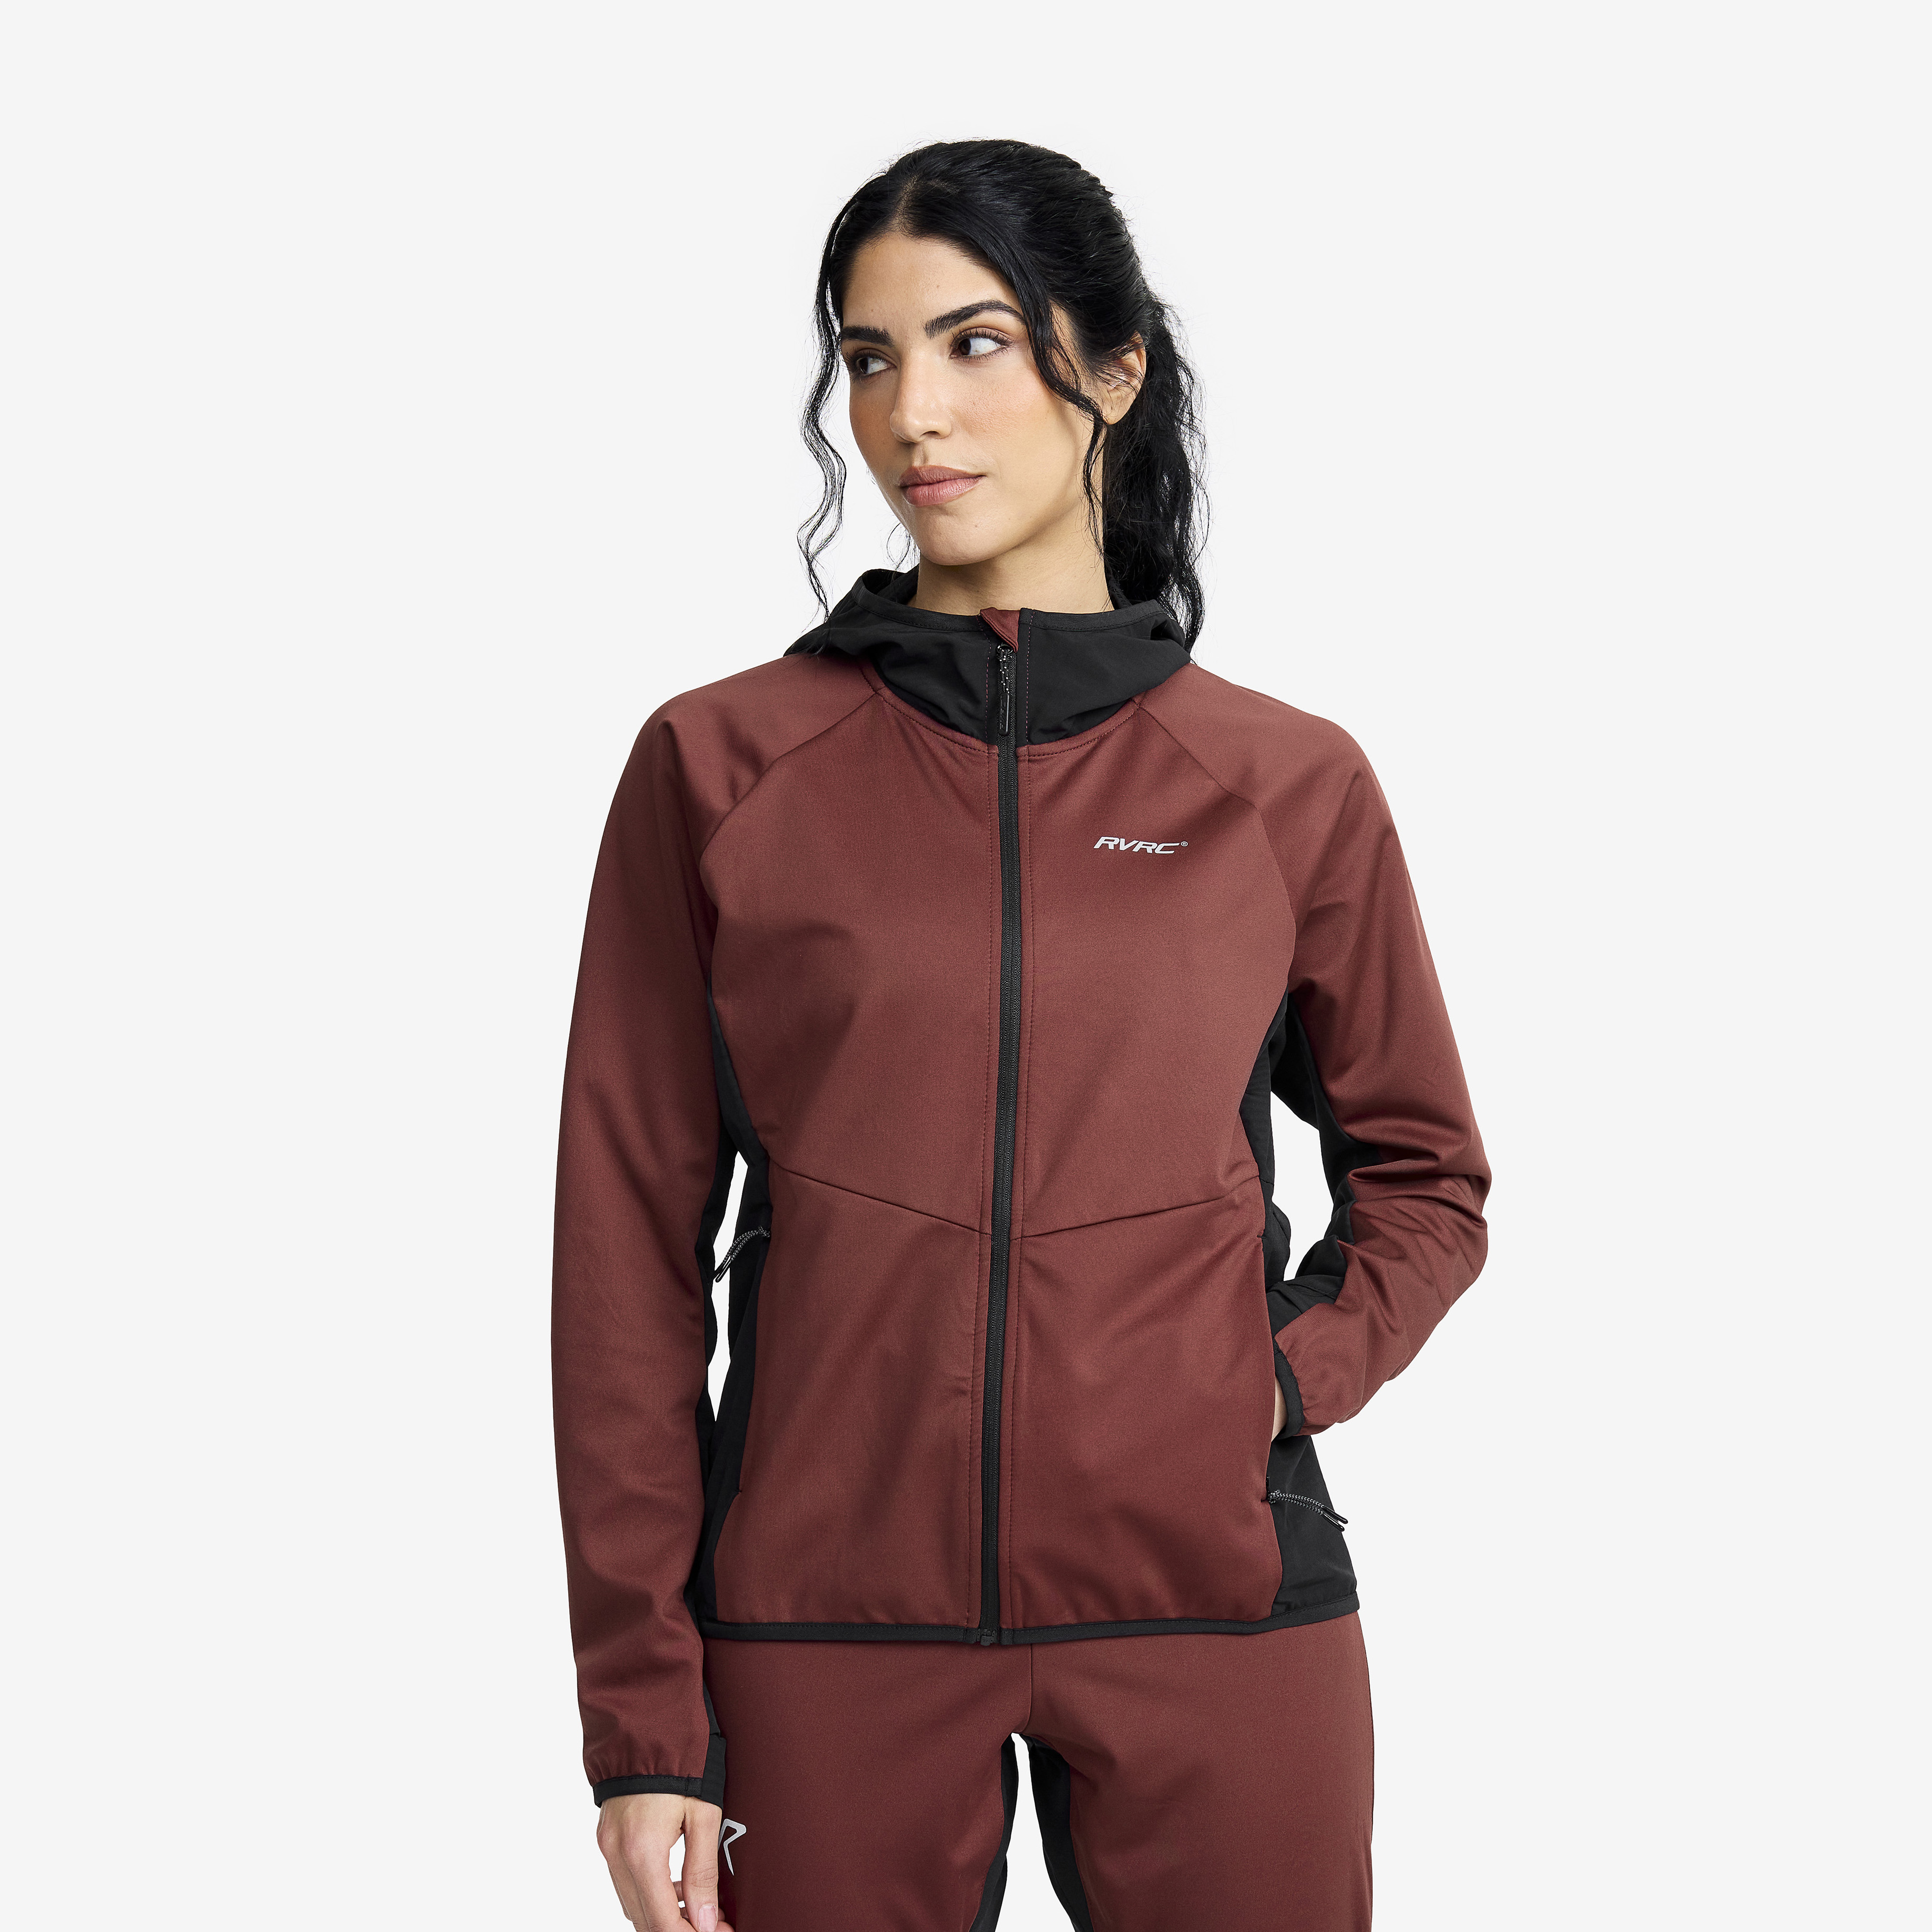 Pace Hooded Wind Jacket Andorra Mujeres